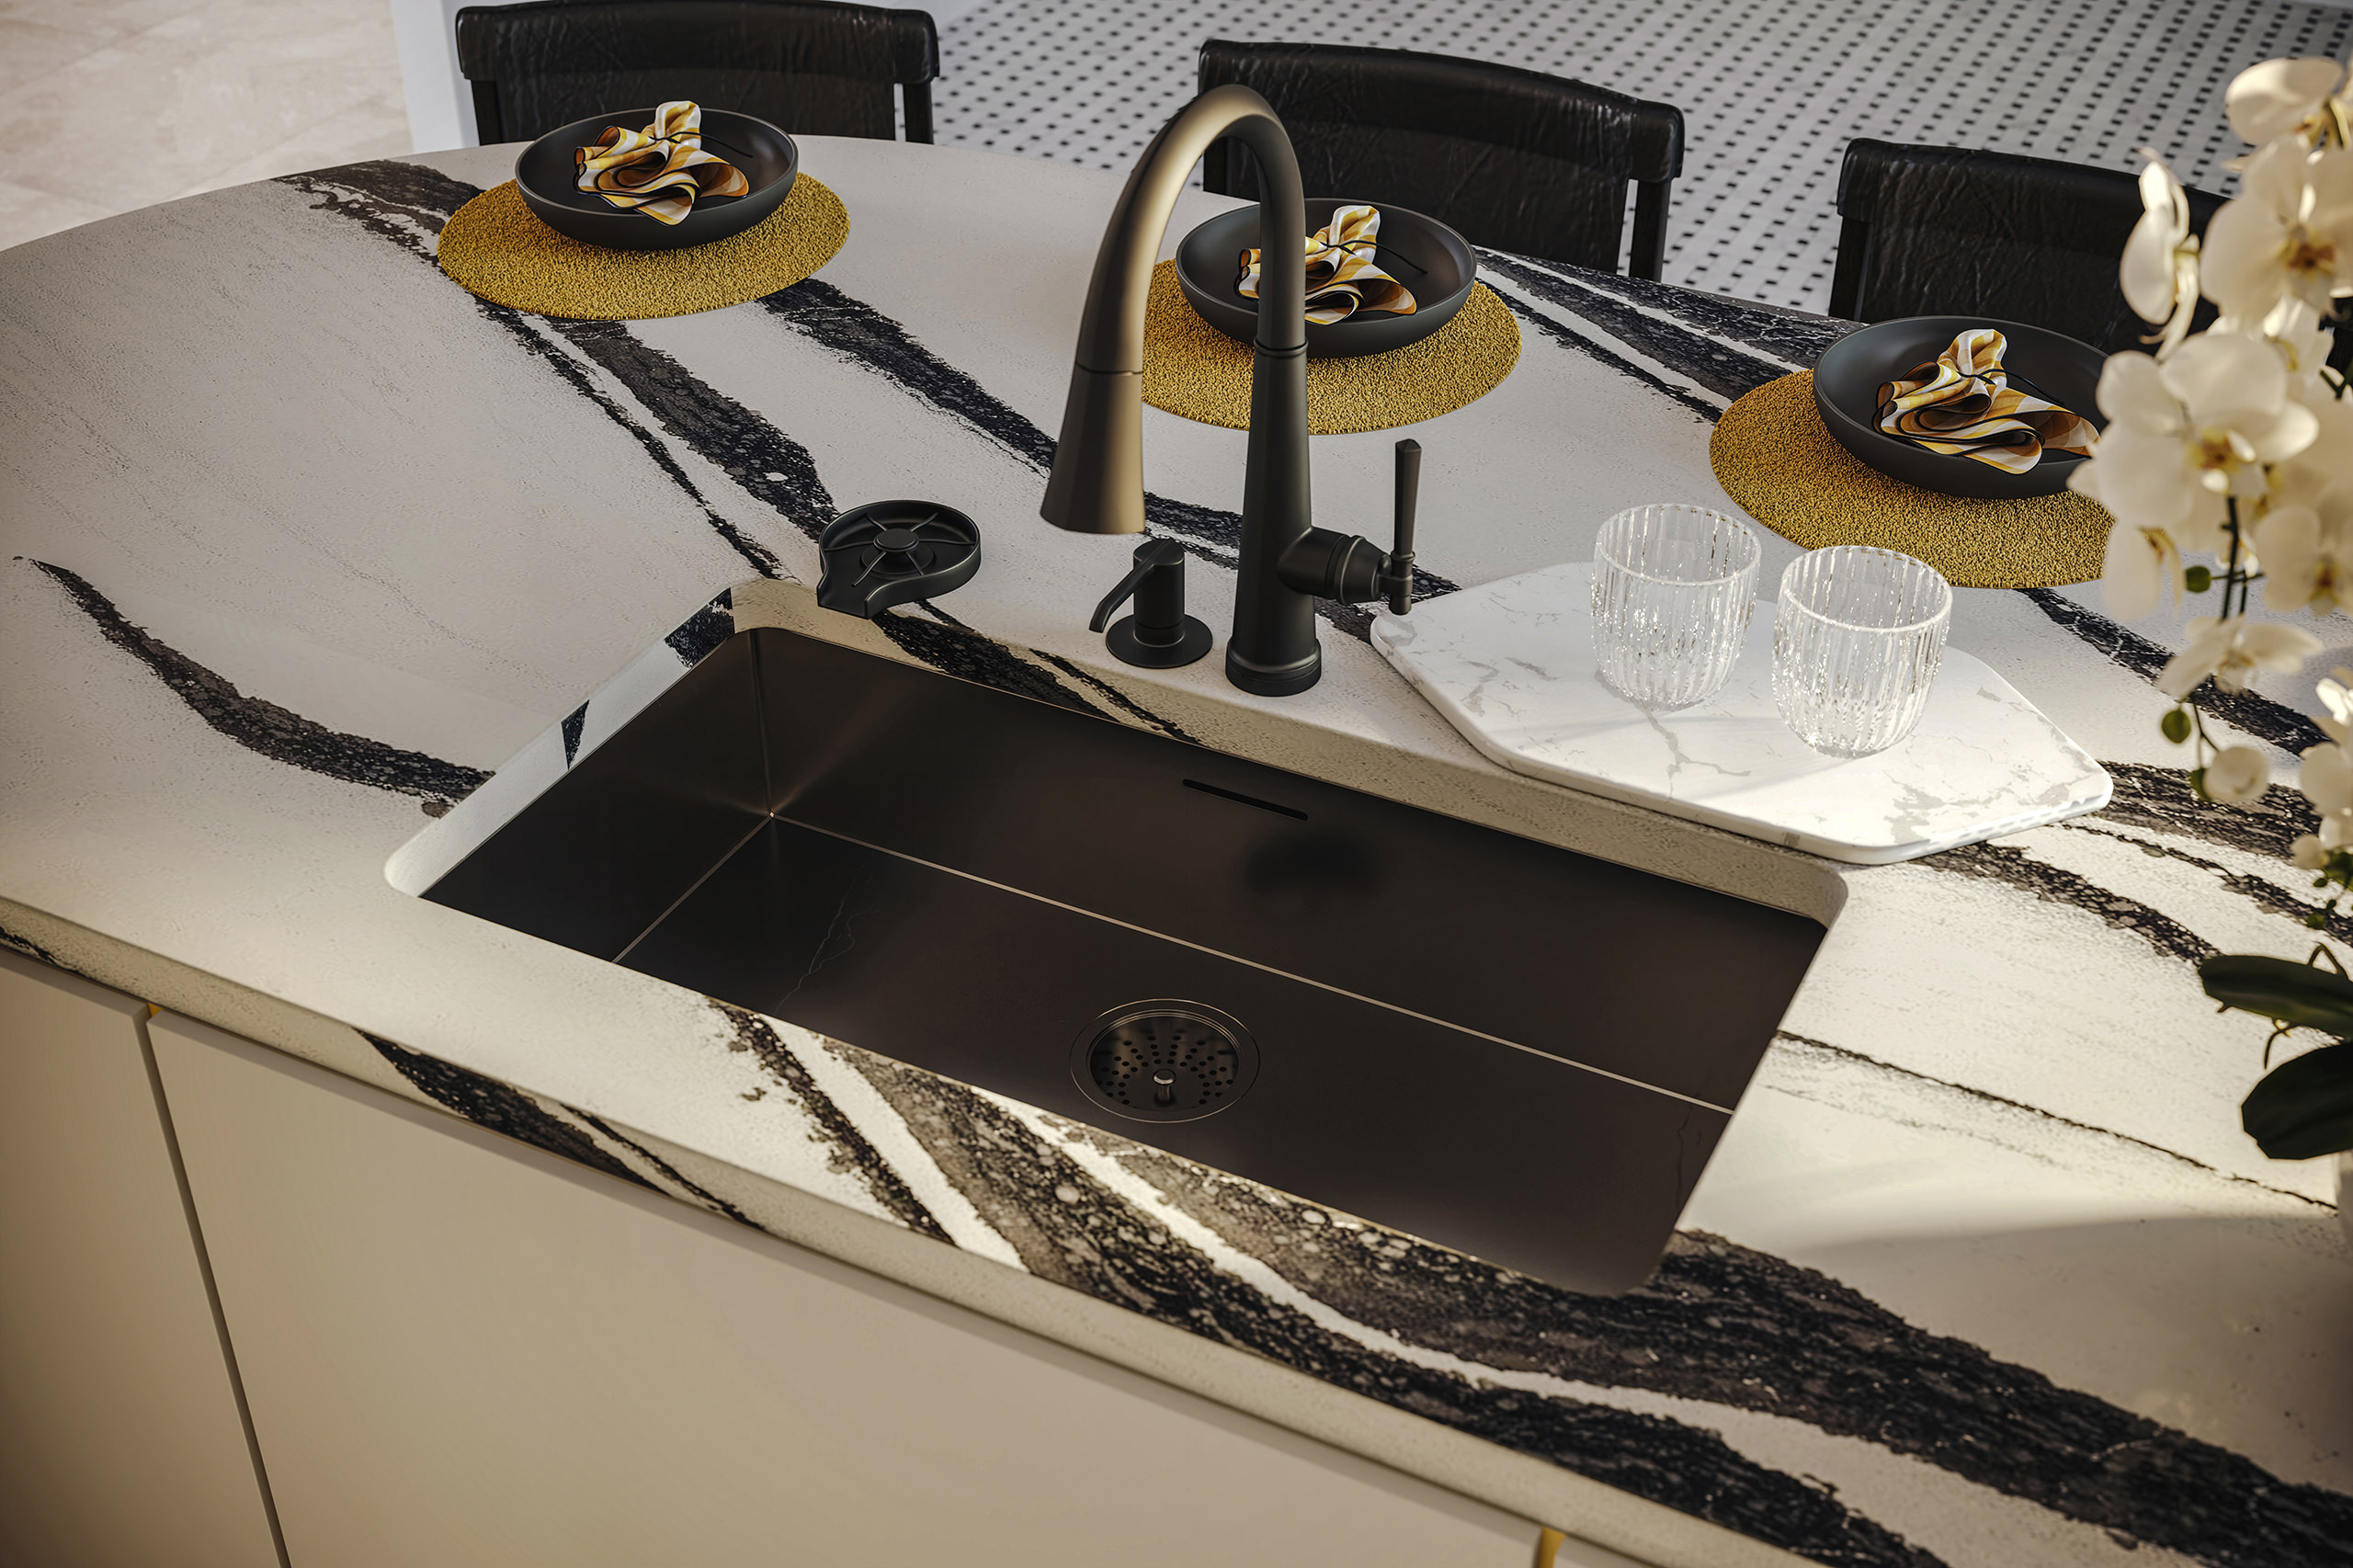 Top 3D view of a built-in sink with Delta black faucet, soap dispenser and glass washук